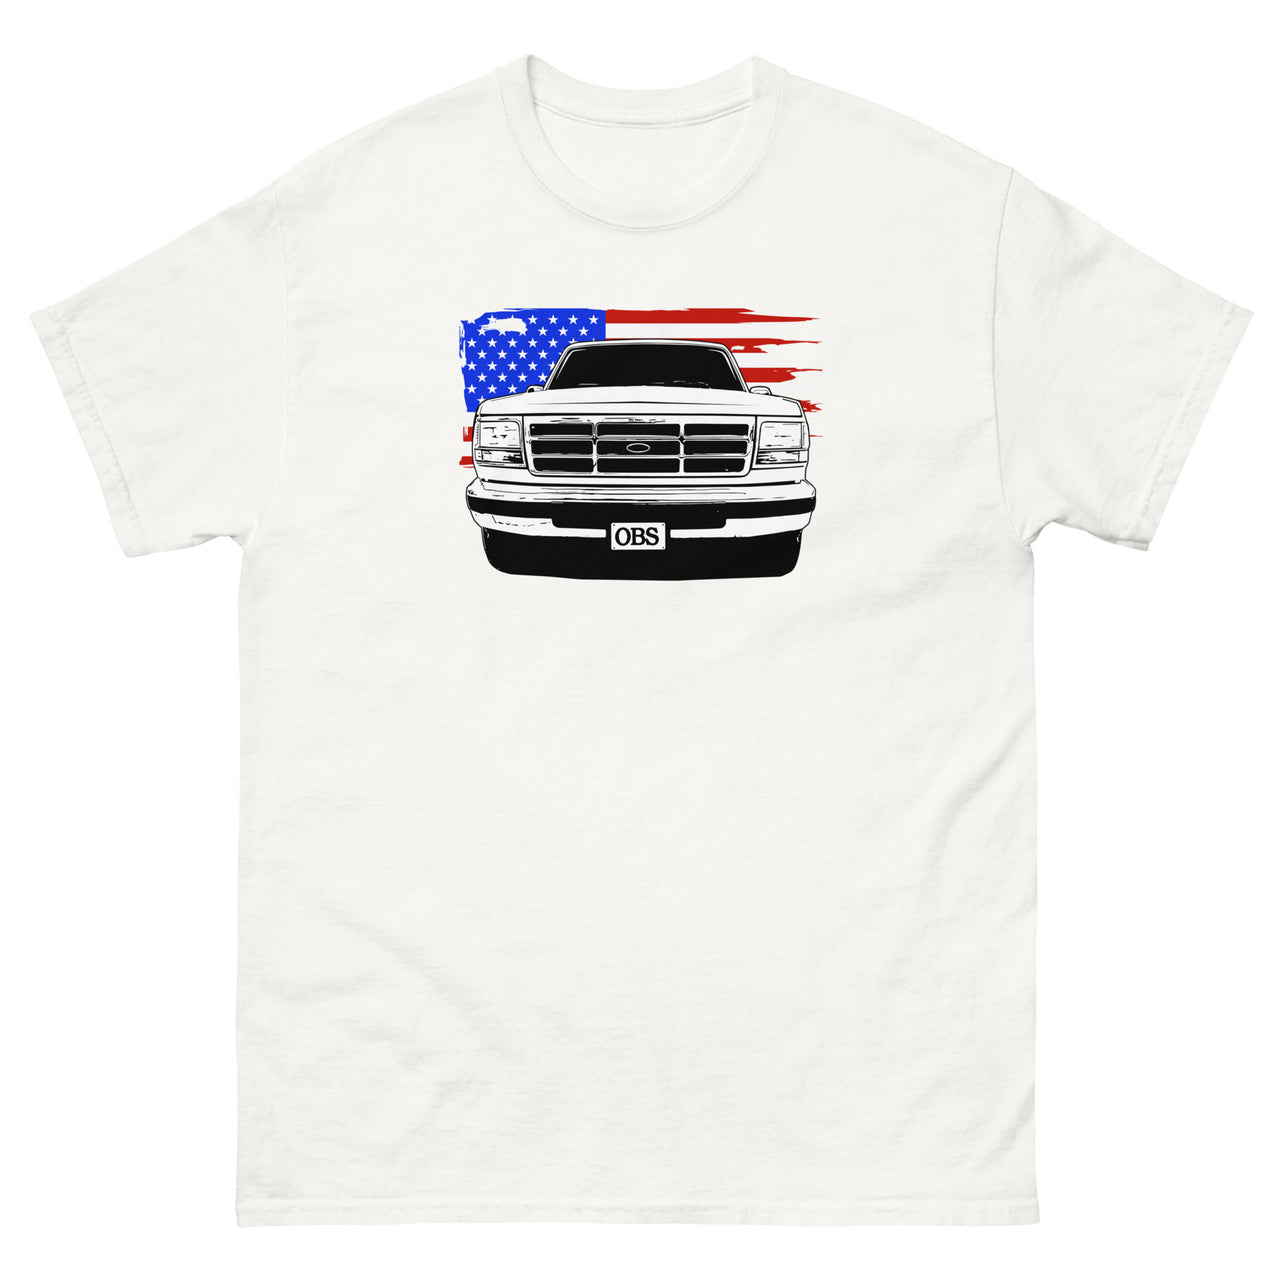 OBS Truck American Flag T-Shirt in white